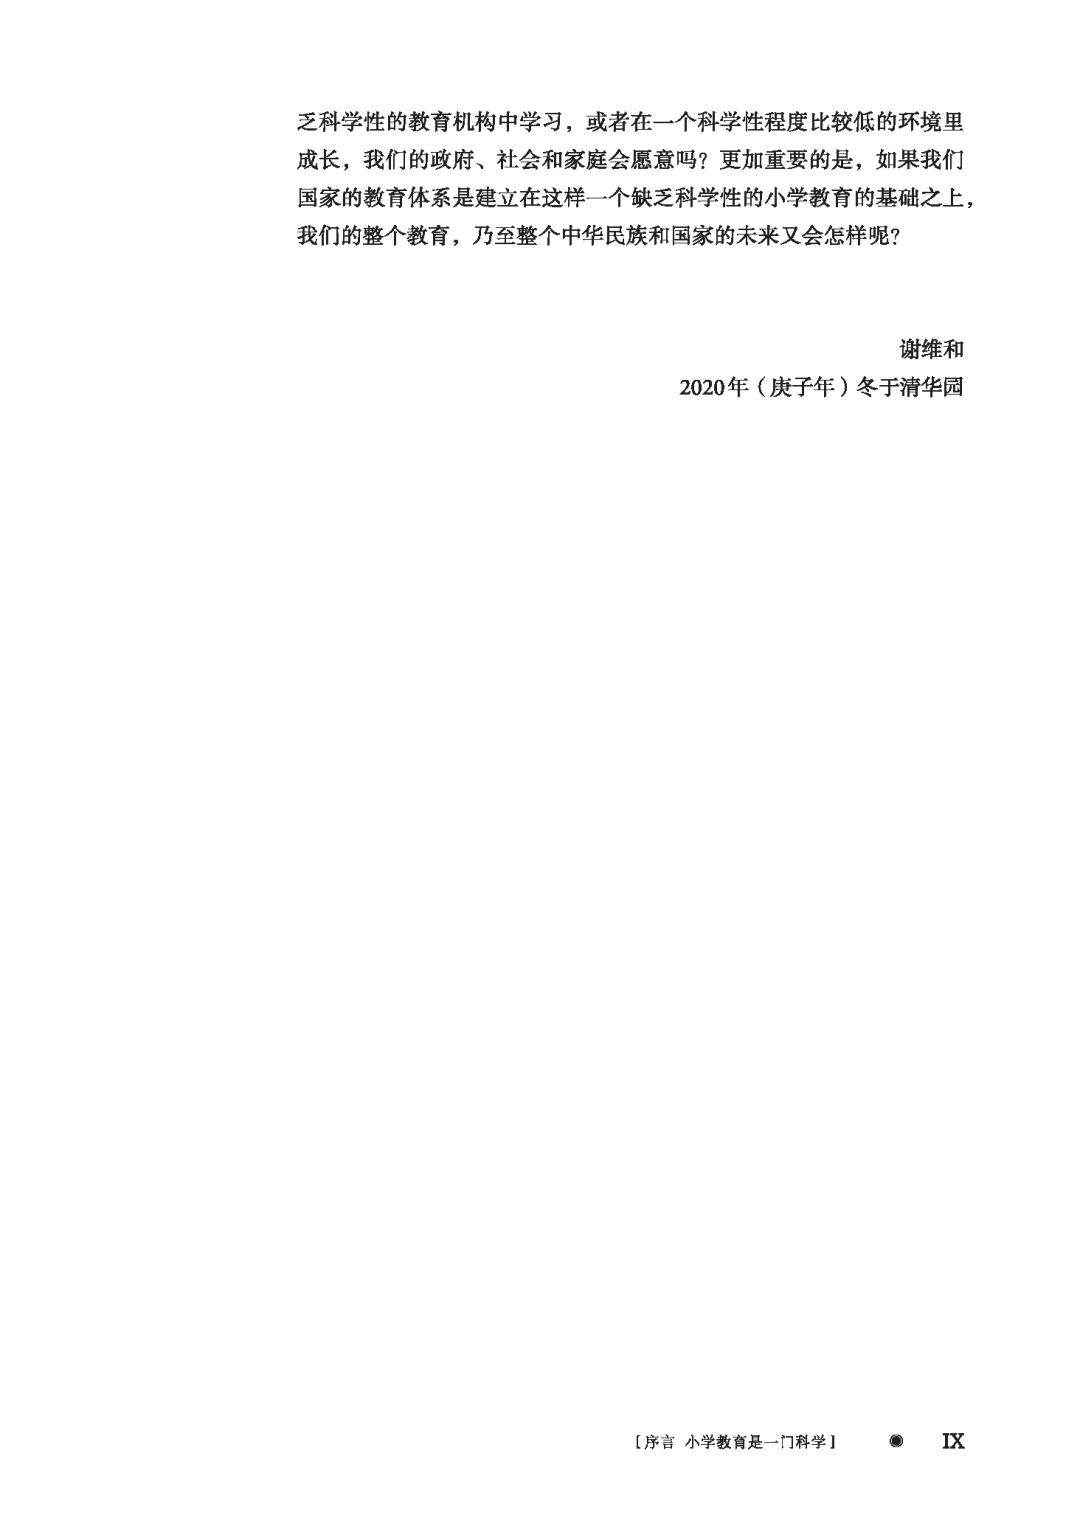 56441-00_preface_页面_09.png